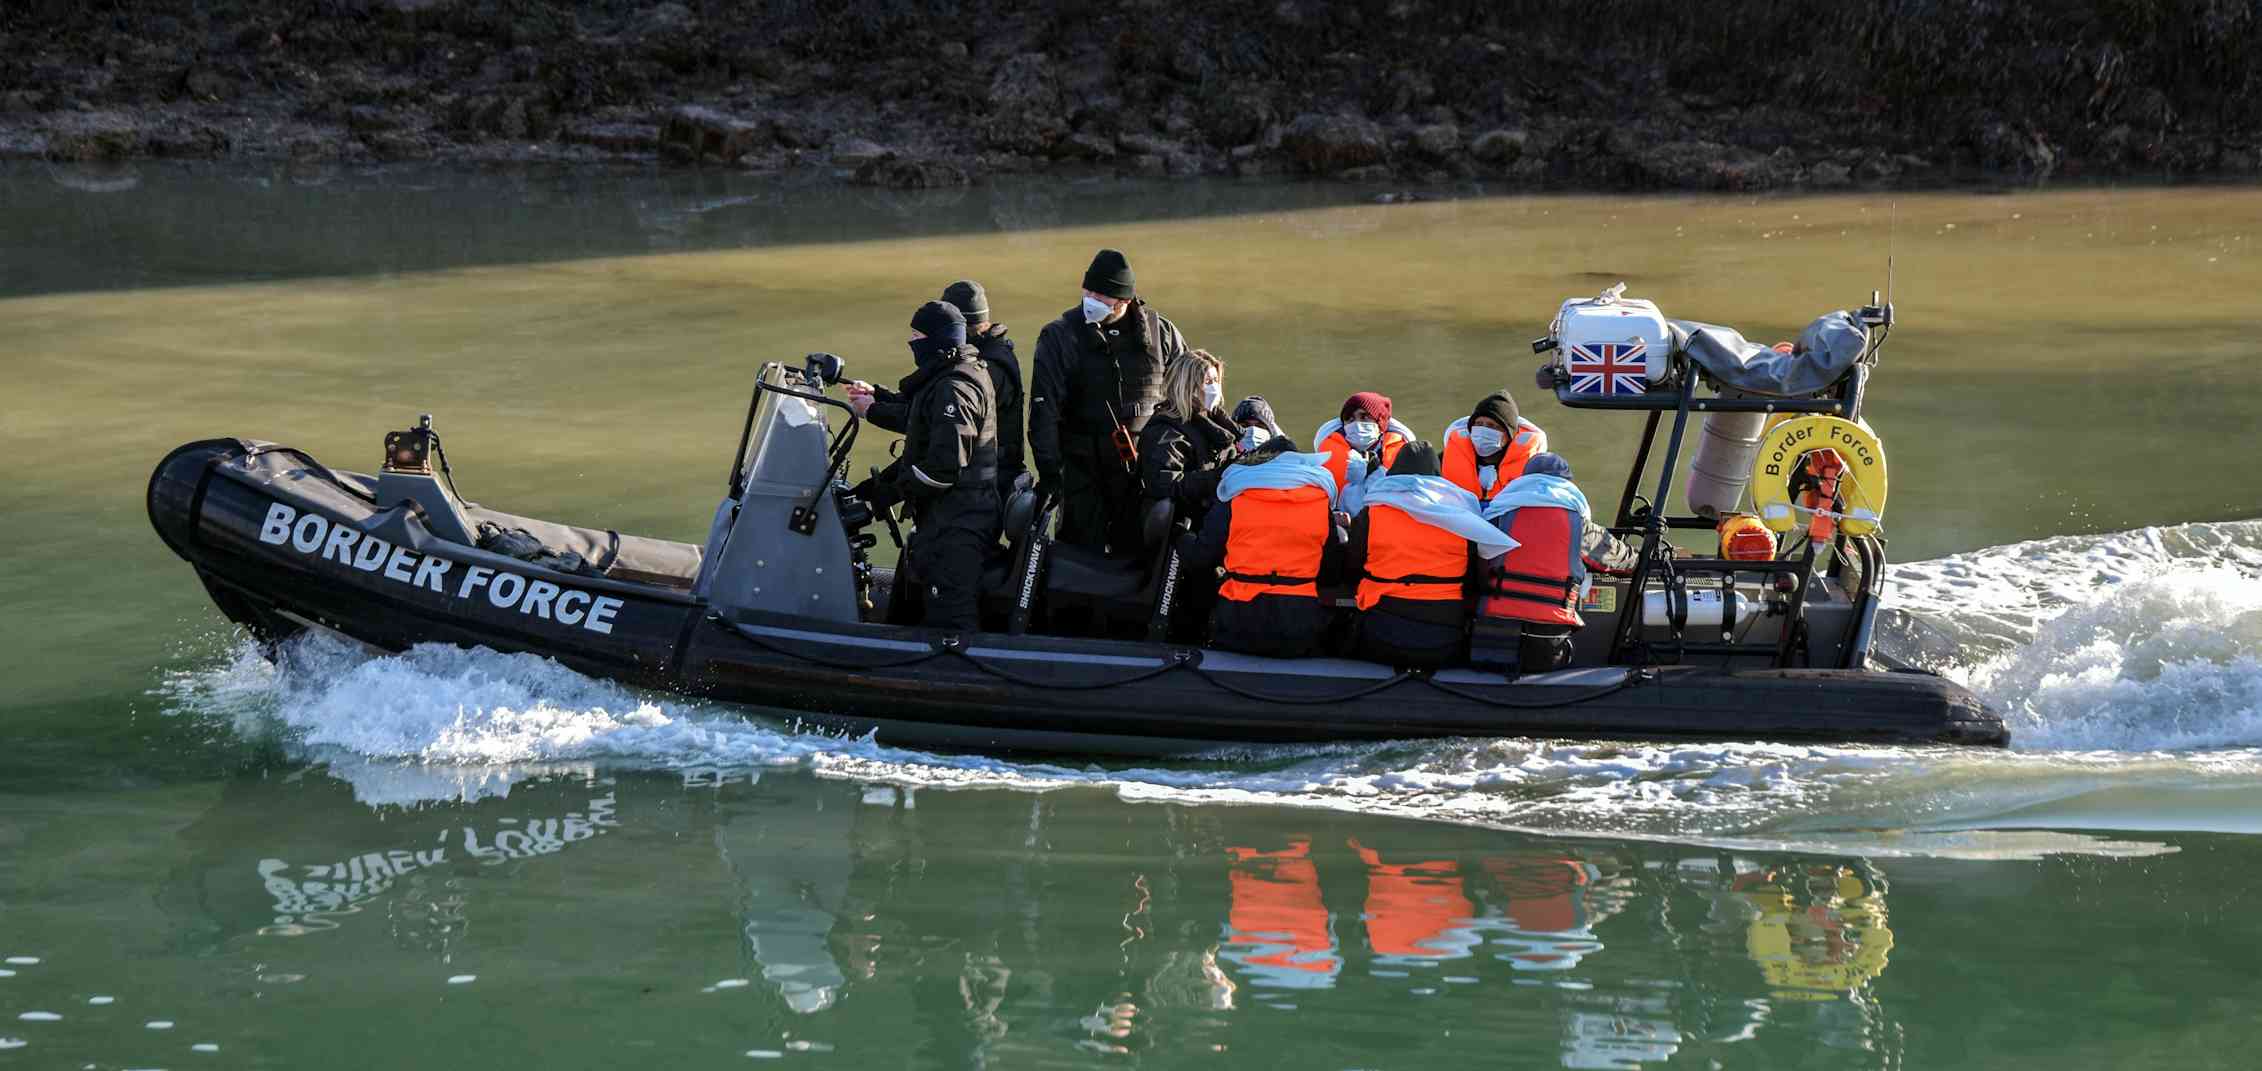 A Border Force boat carrying a small number of people in orange life vests.